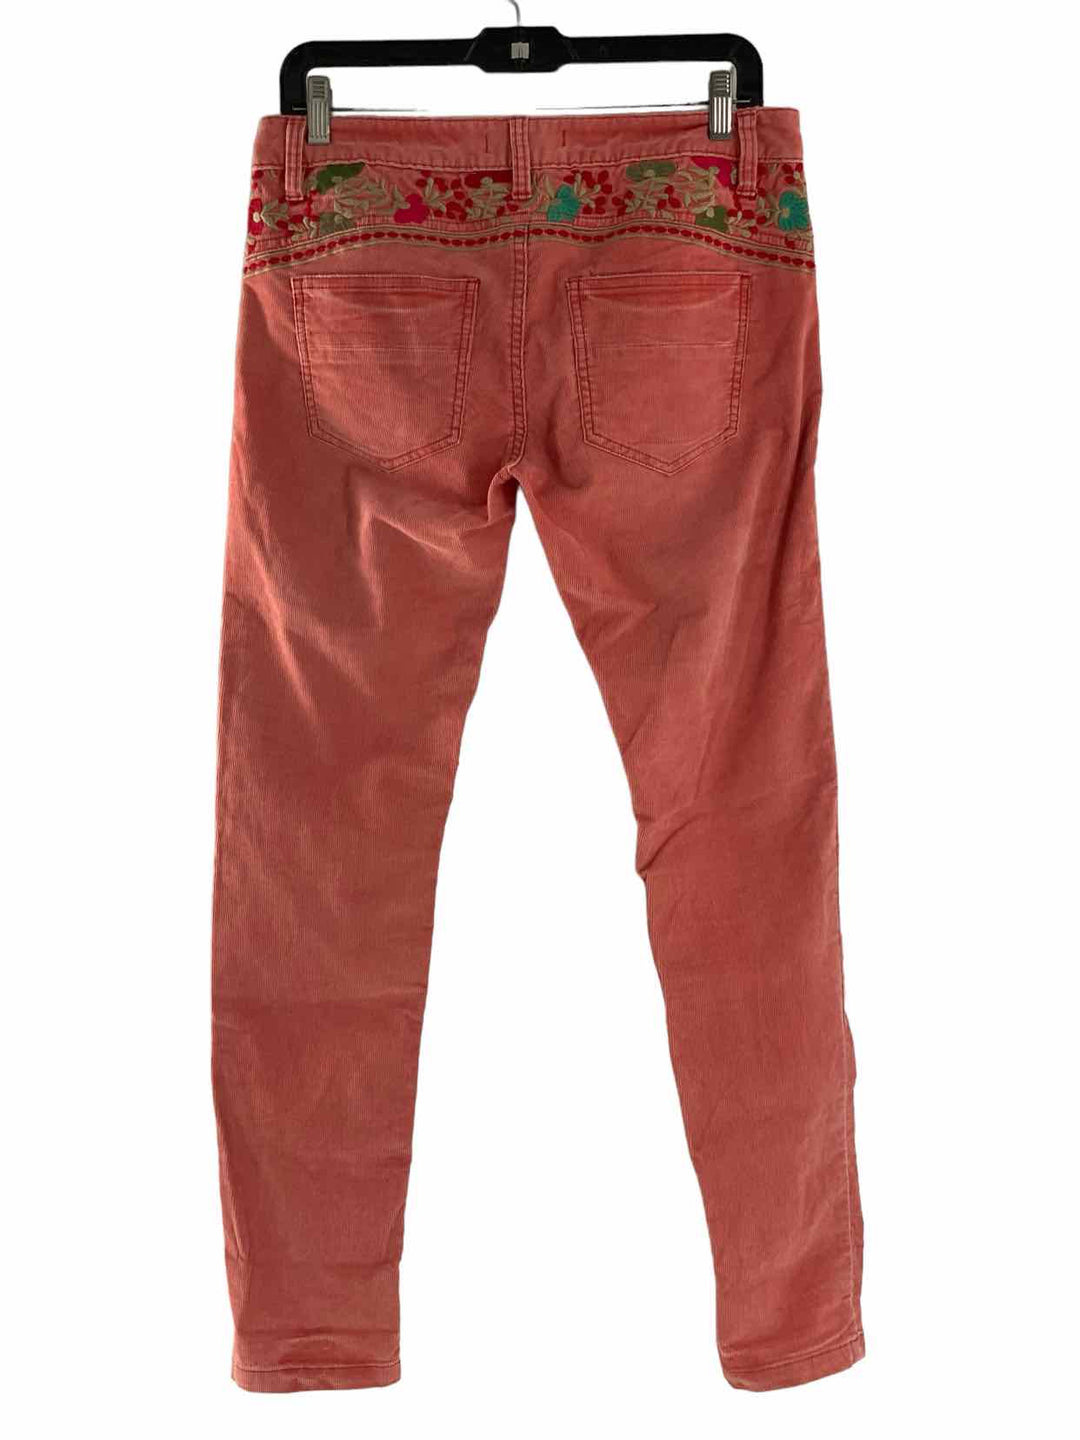 Free People Size 28 Coral Floral Corduroy Pants